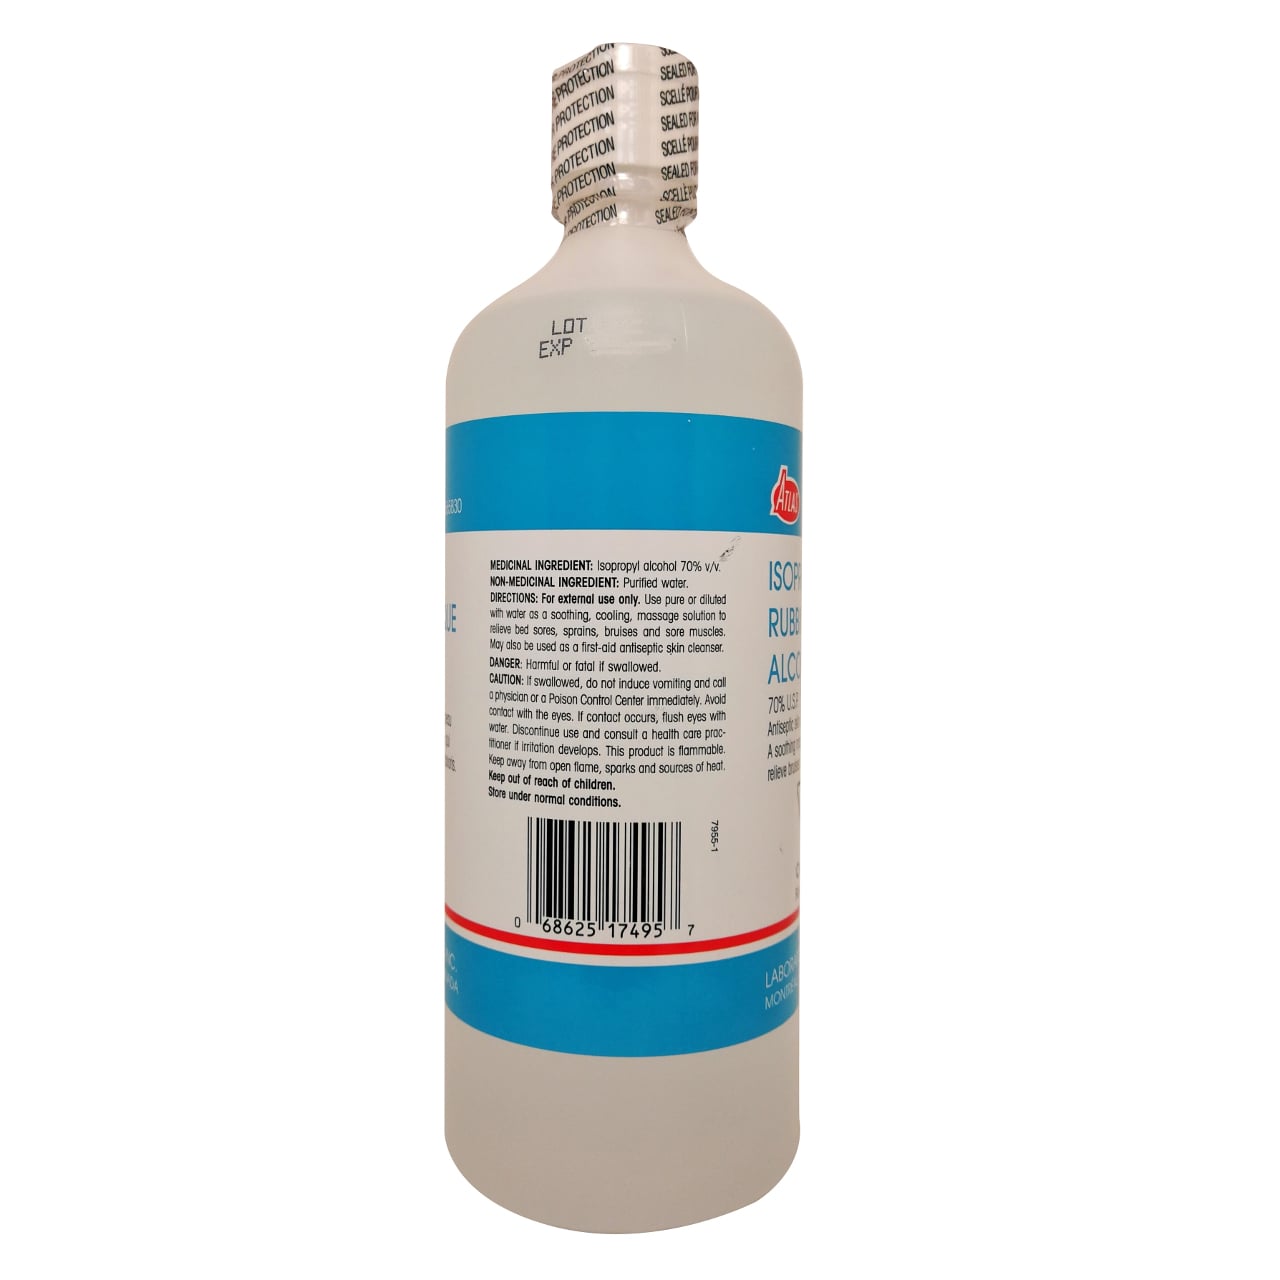 Product details, ingredients, directions, and cautions for Atlas Isopropyl Alcohol 70% in English